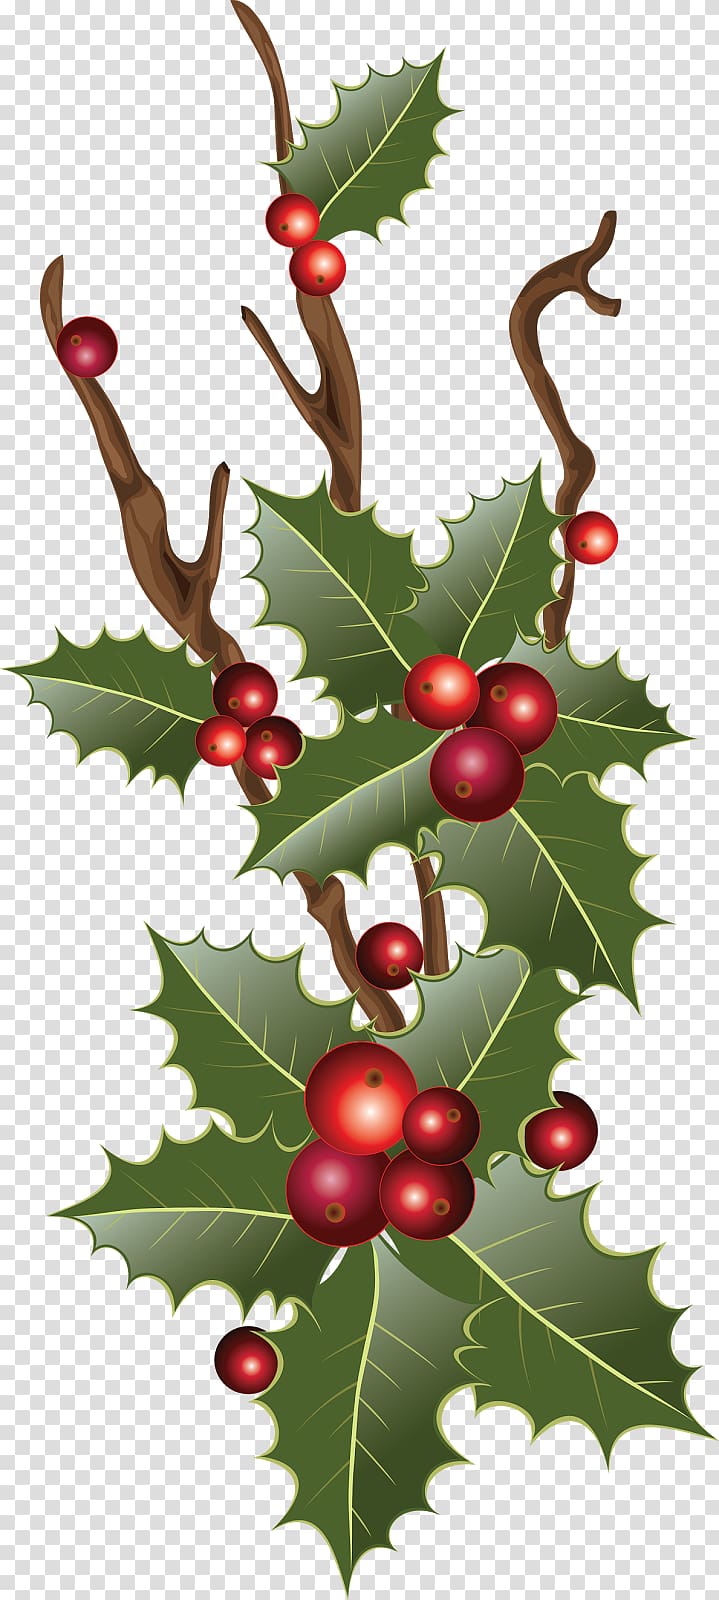 Garland Christmas decoration Christmas ornament Christmas tree, T transparent background PNG clipart